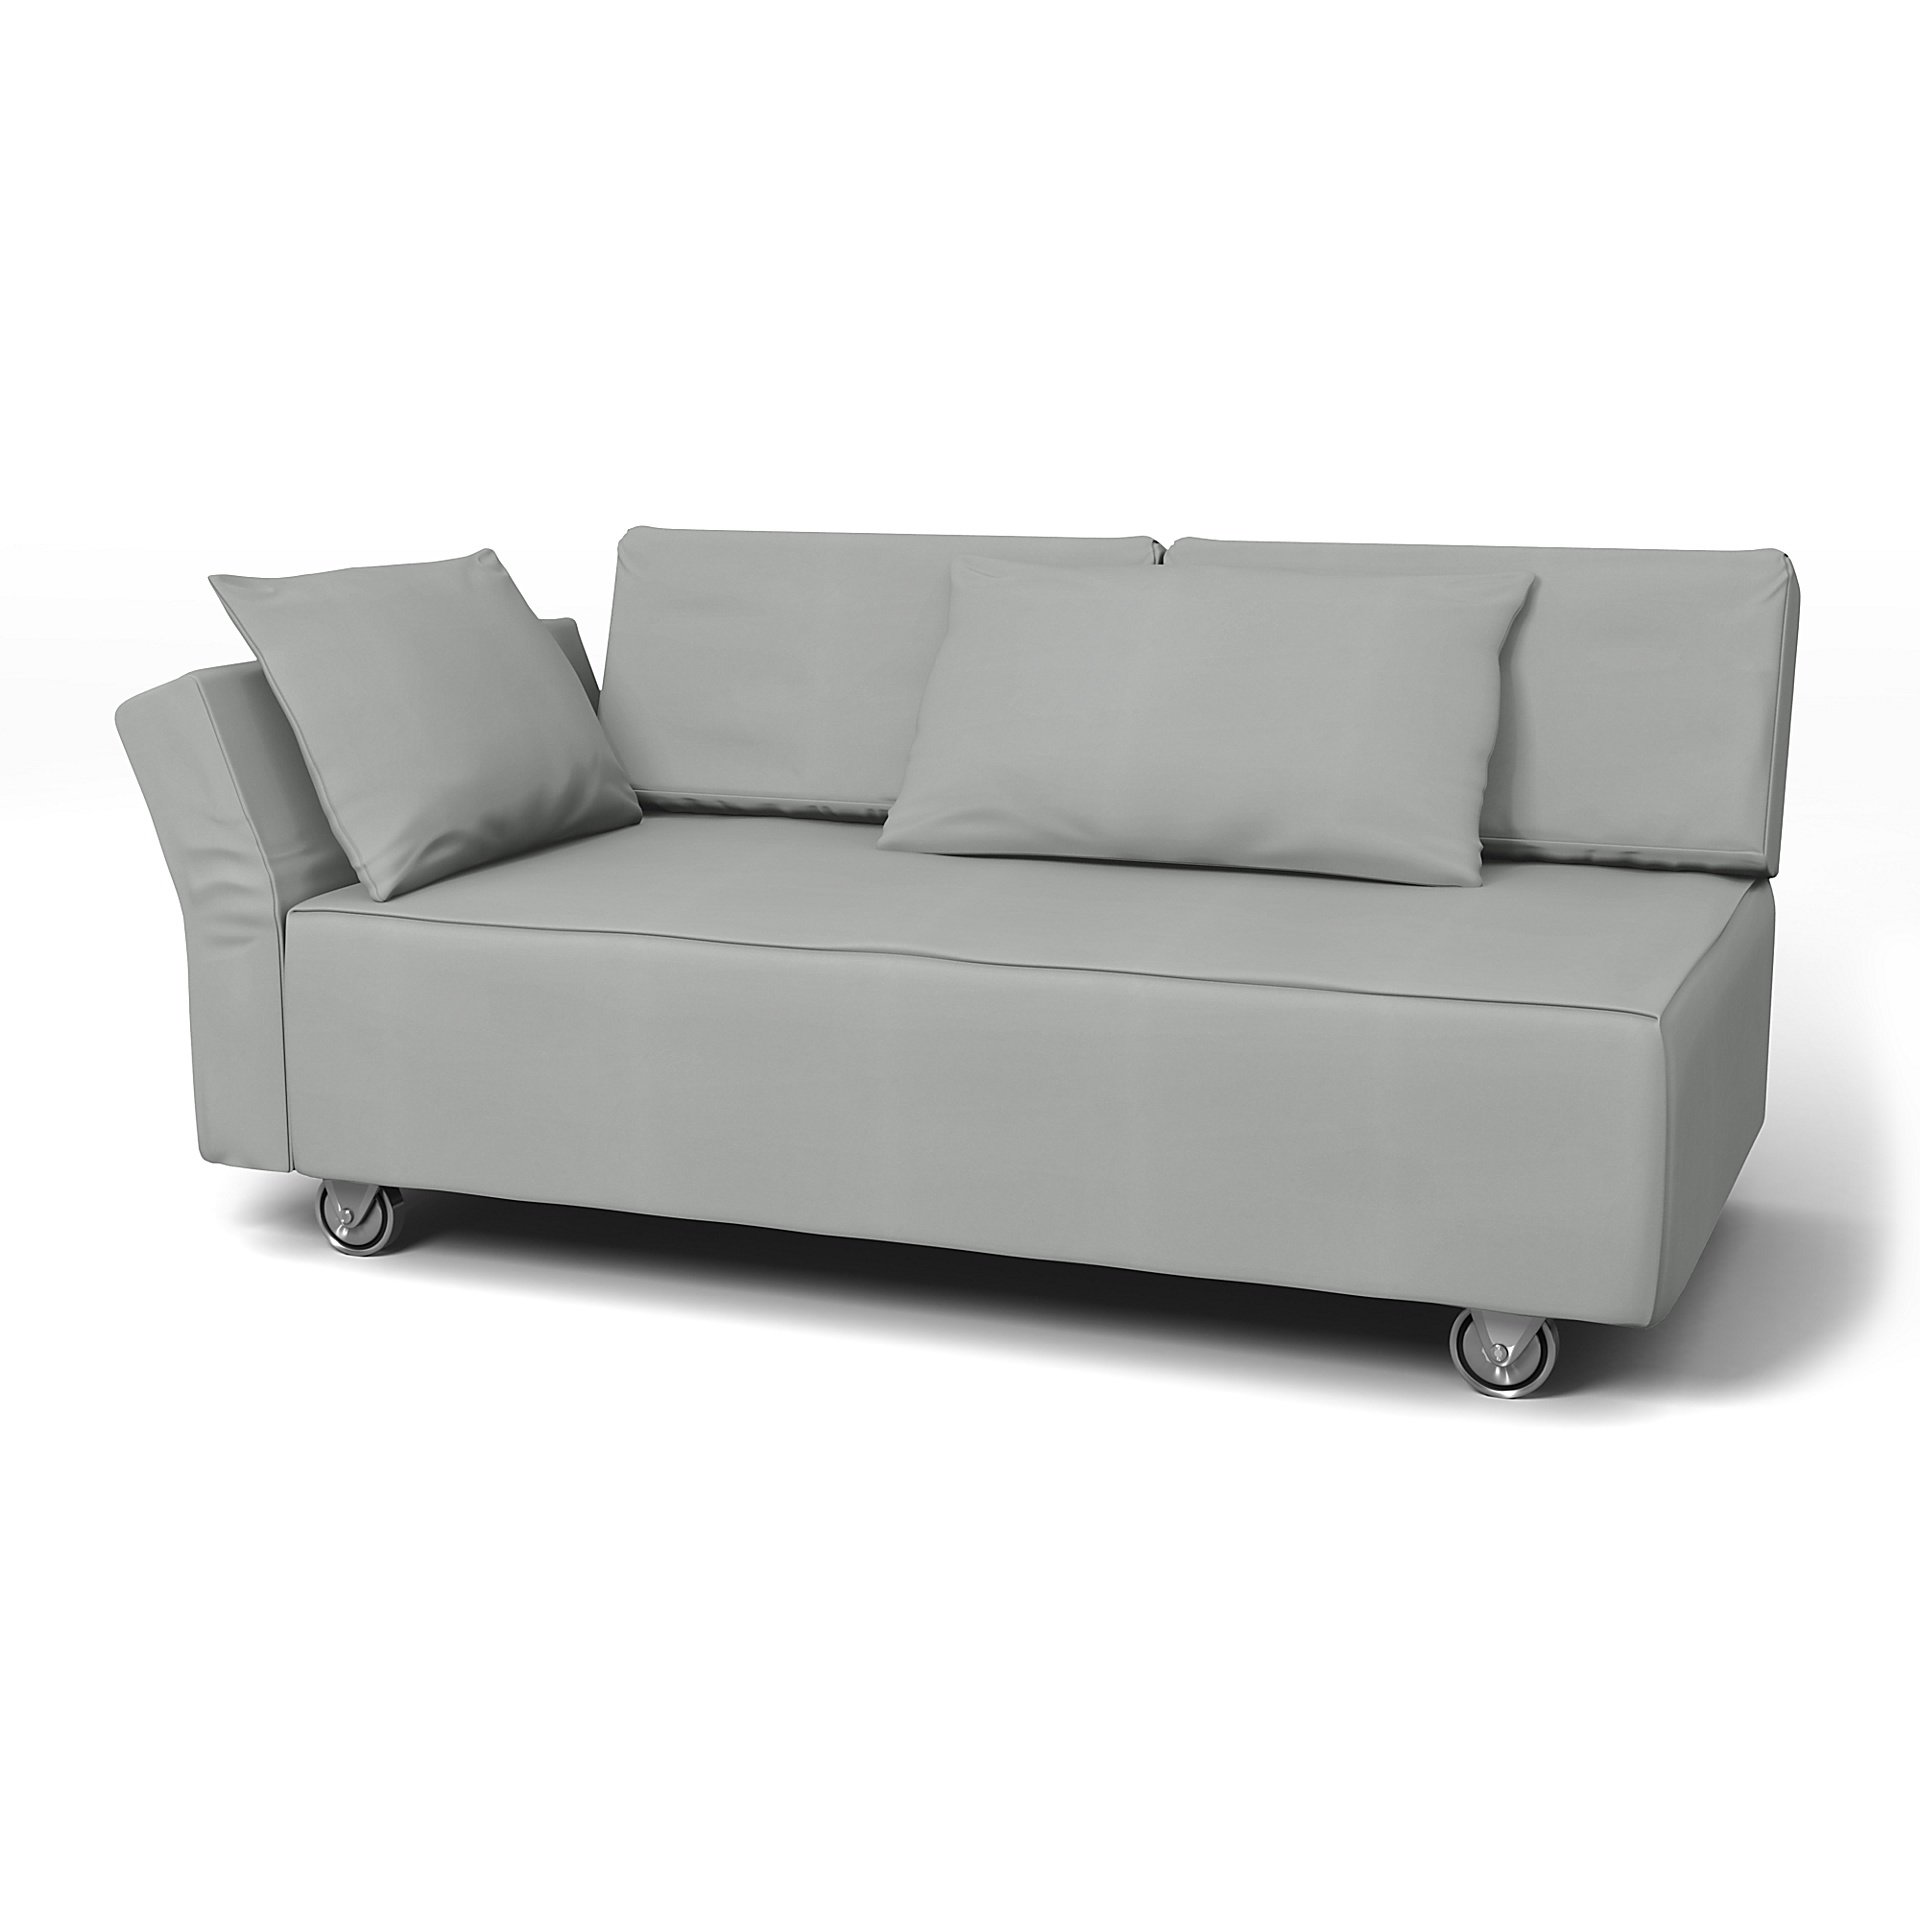 IKEA - Falsterbo 2 Seat Sofa with Left Arm Cover, Silver Grey, Cotton - Bemz